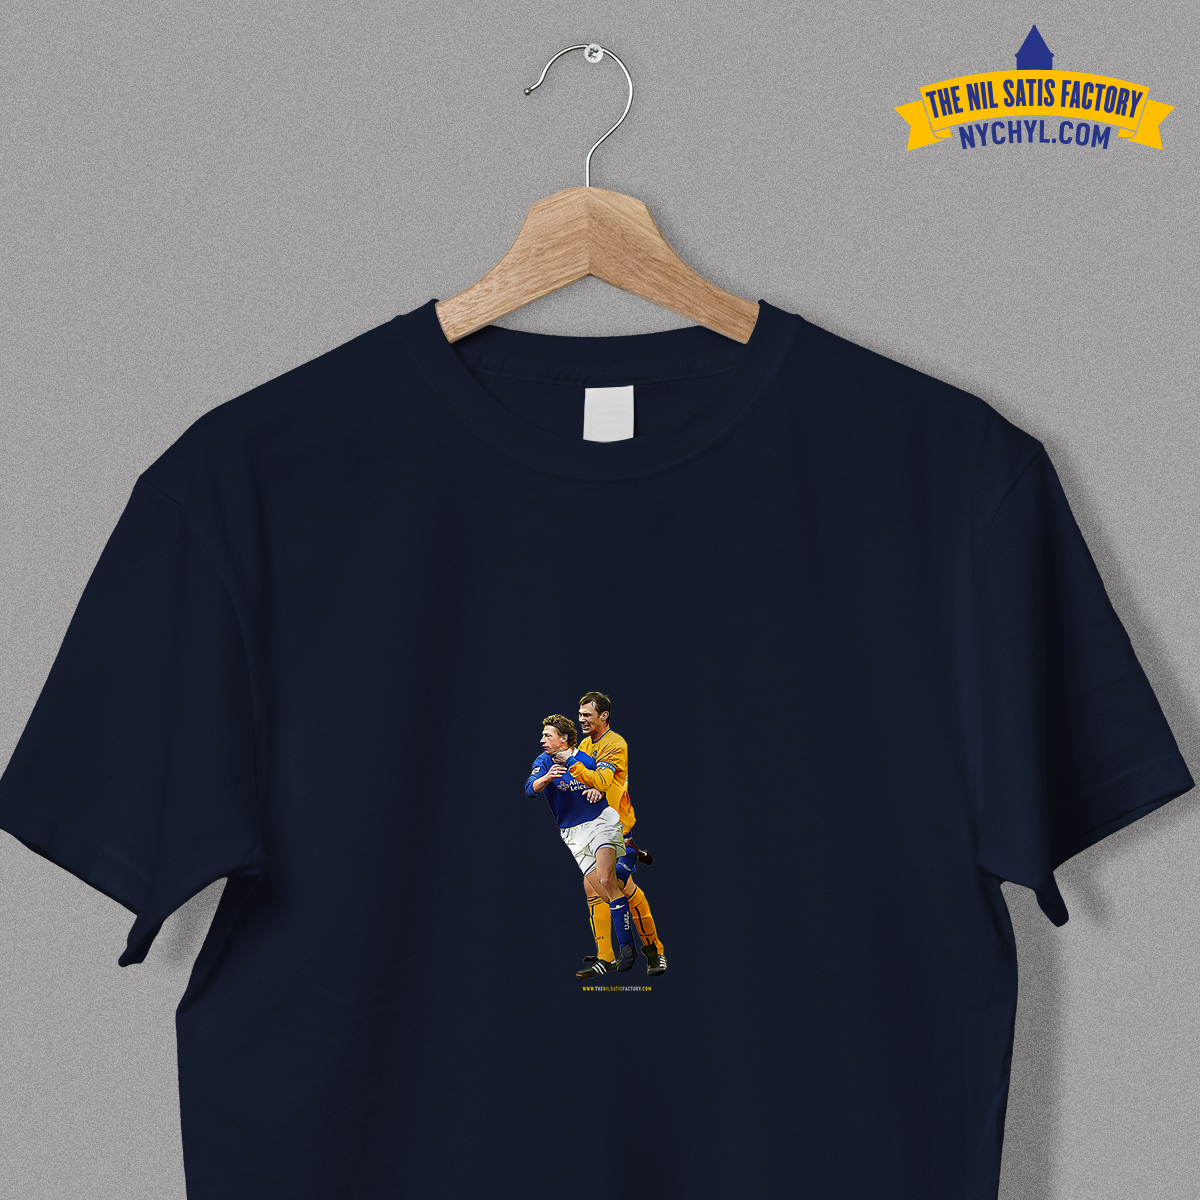 A recreated and enhanced HD image of Duncan and his best Freund. High quality print on premium 100% cotton in navy blue. Visit the product page of the website at nychyl.com/product/duncan…